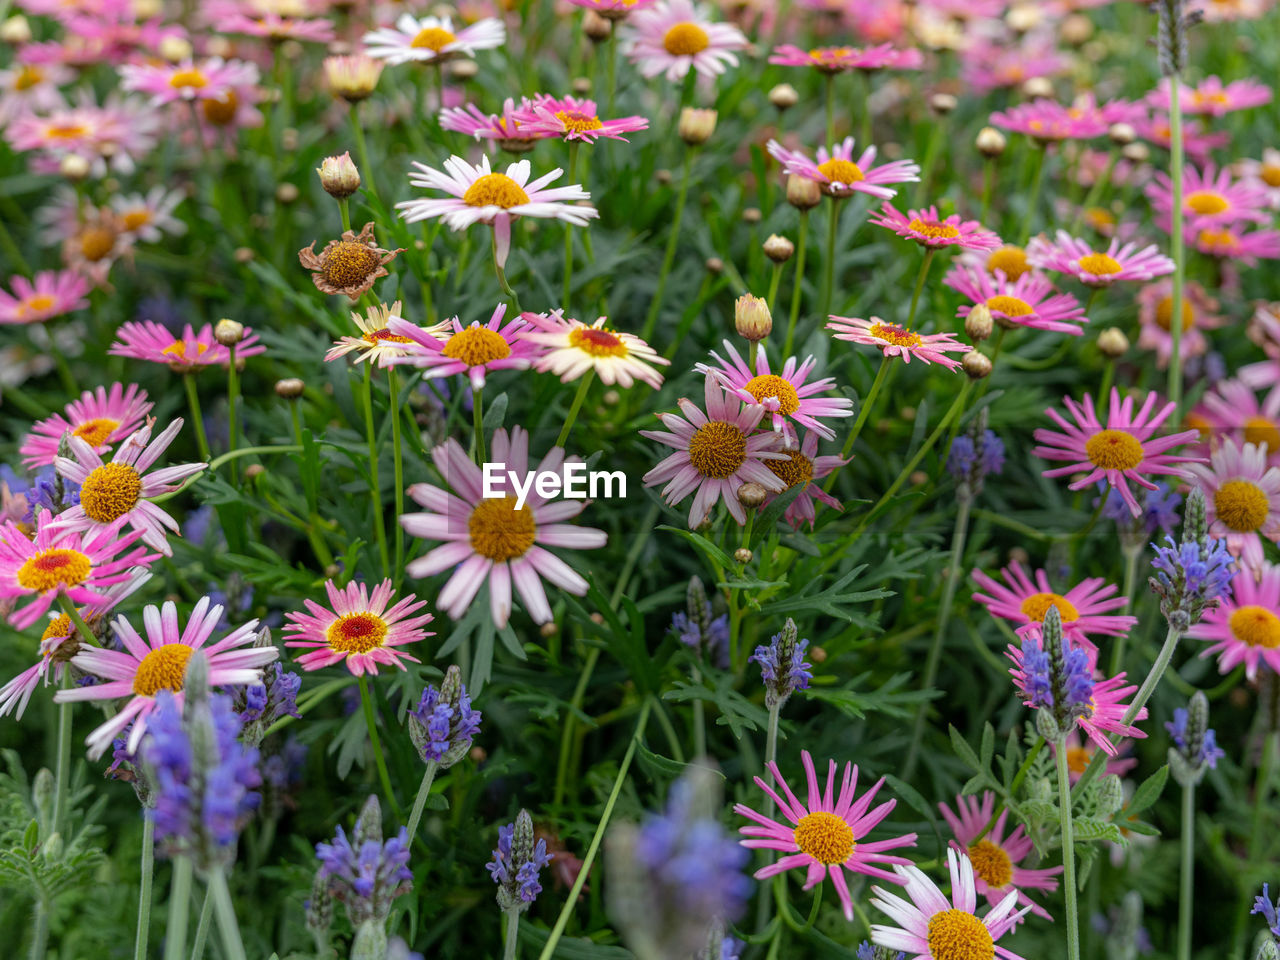 flower, flowering plant, plant, freshness, beauty in nature, fragility, growth, meadow, nature, close-up, flower head, petal, no people, inflorescence, multi colored, aster, botany, day, green, field, wildflower, outdoors, plant part, leaf, land, high angle view, prairie, herb, focus on foreground, medicine, garden, flowerbed, yellow, full frame